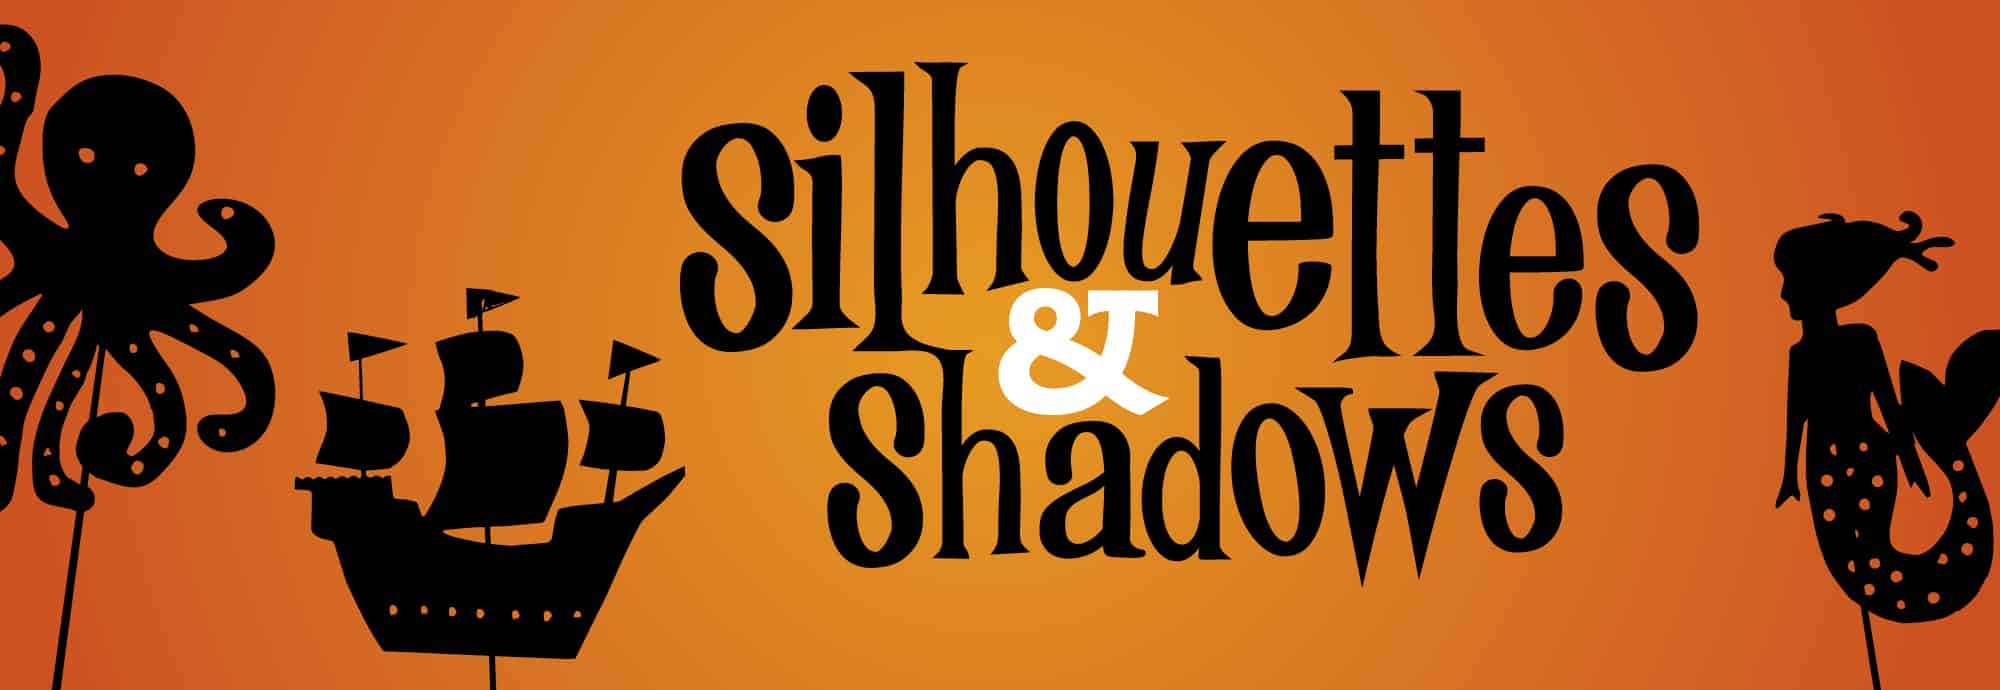 Three shadow puppets - an octopus, a pirate ship and a mermaid - are held up against an orange background. Text reads 'Silhouettes & Shadows'.